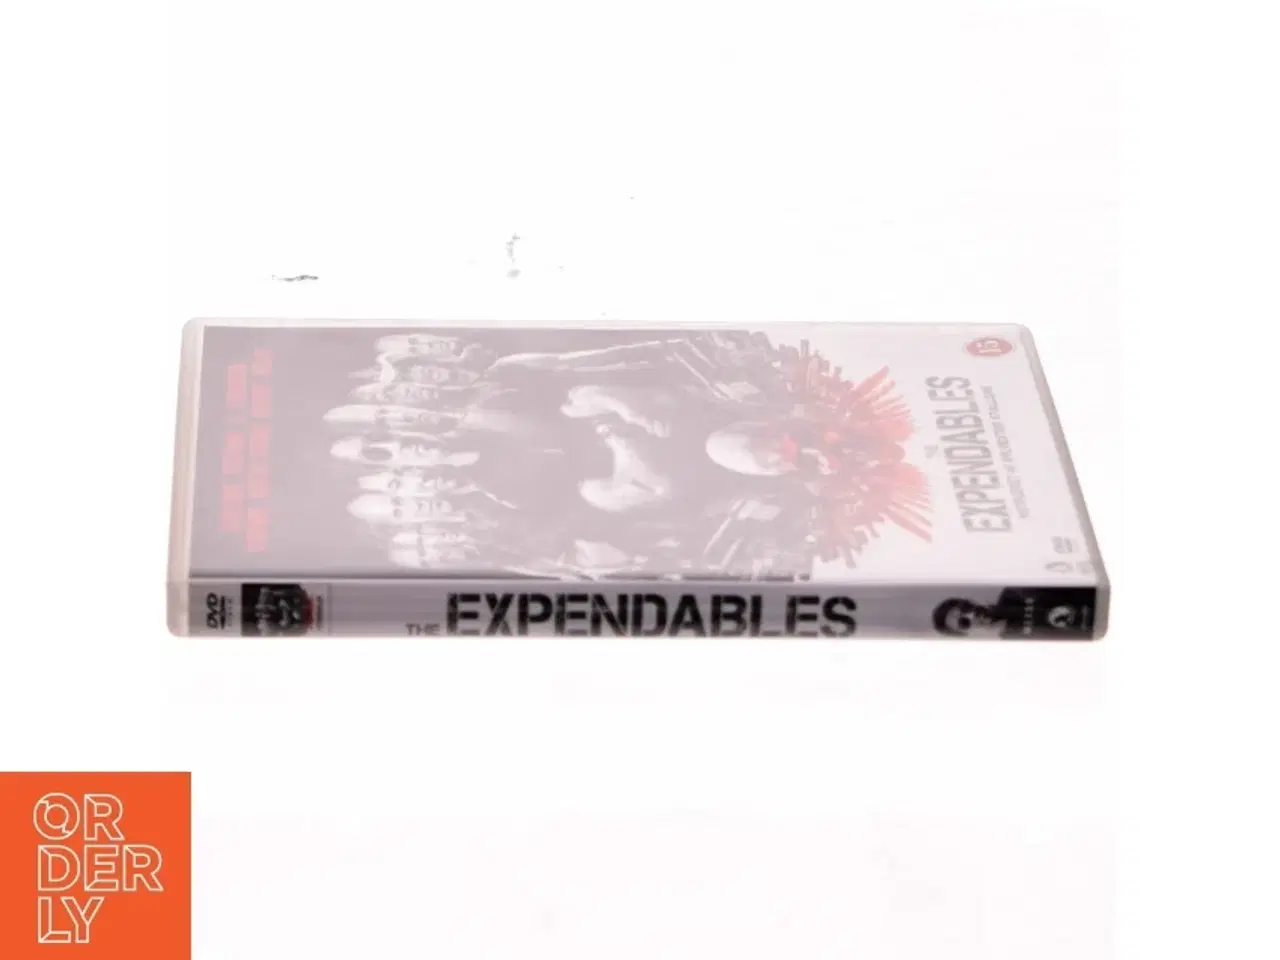 Billede 2 - The Expendables (DVD)